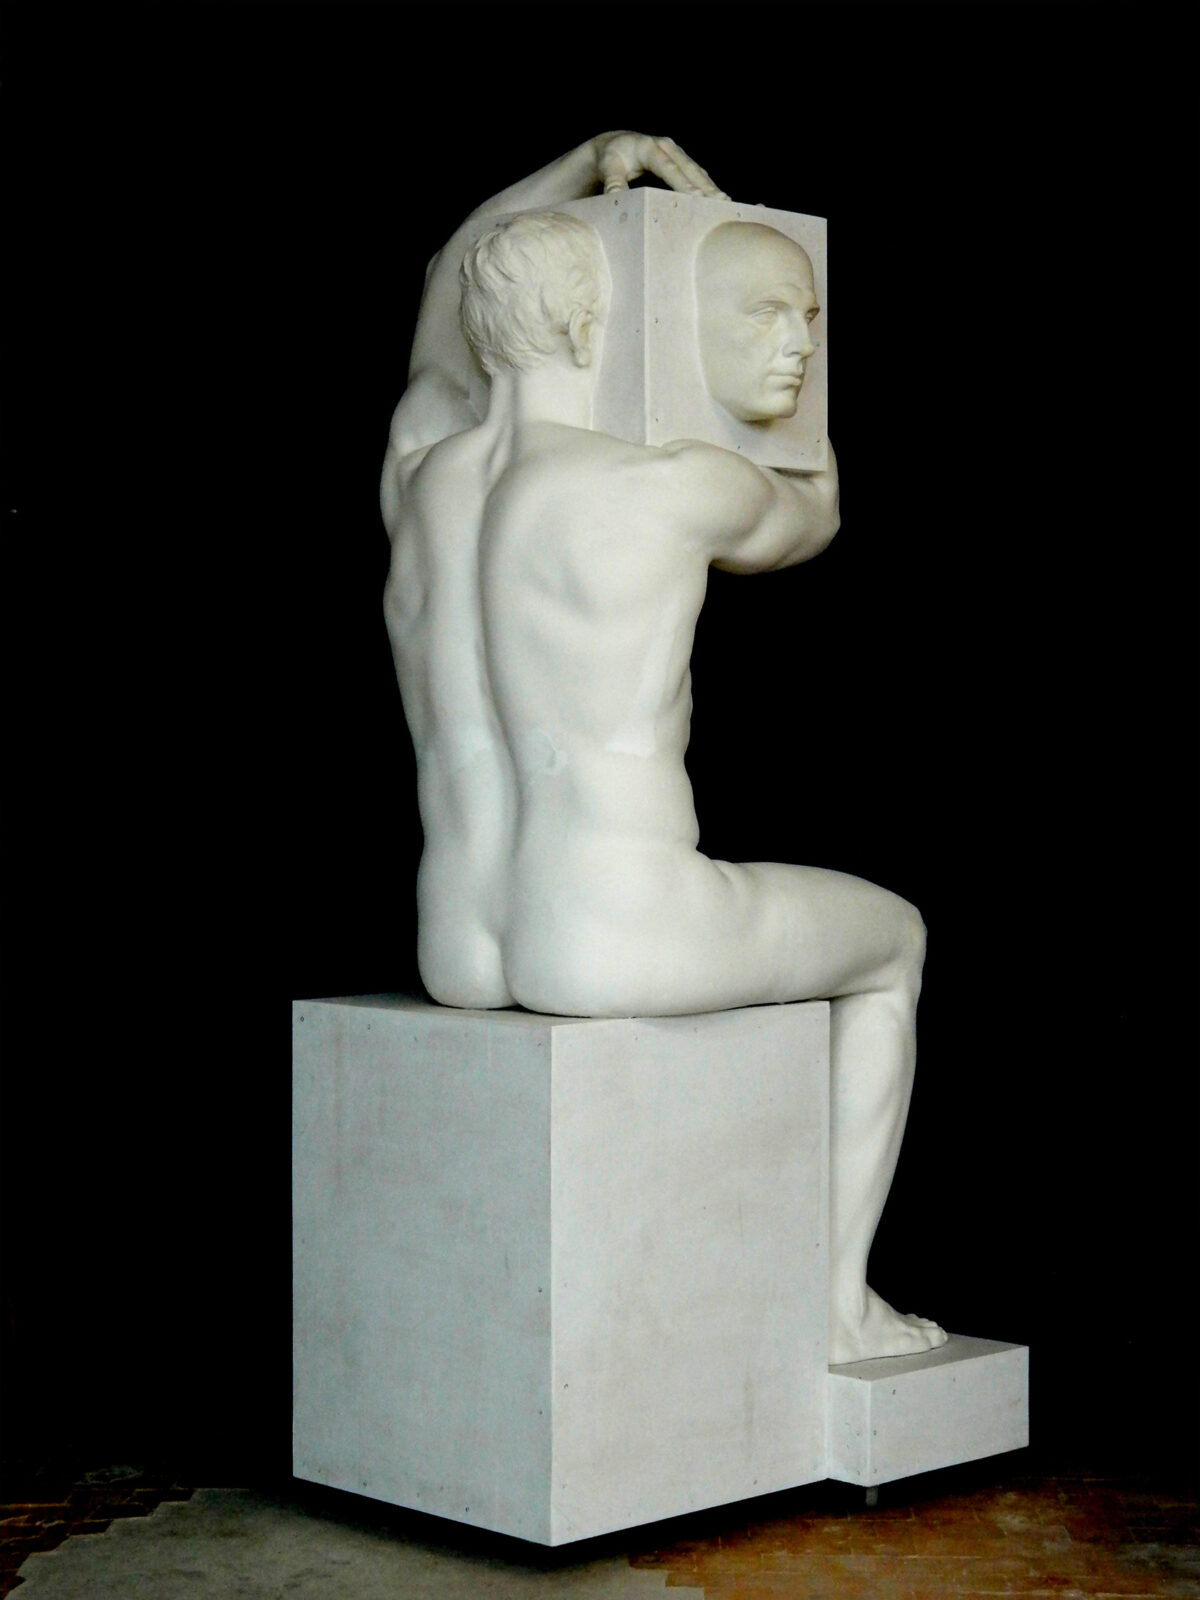 Formidable Granite And Marble Sculptures By Adrian Balogh (3)